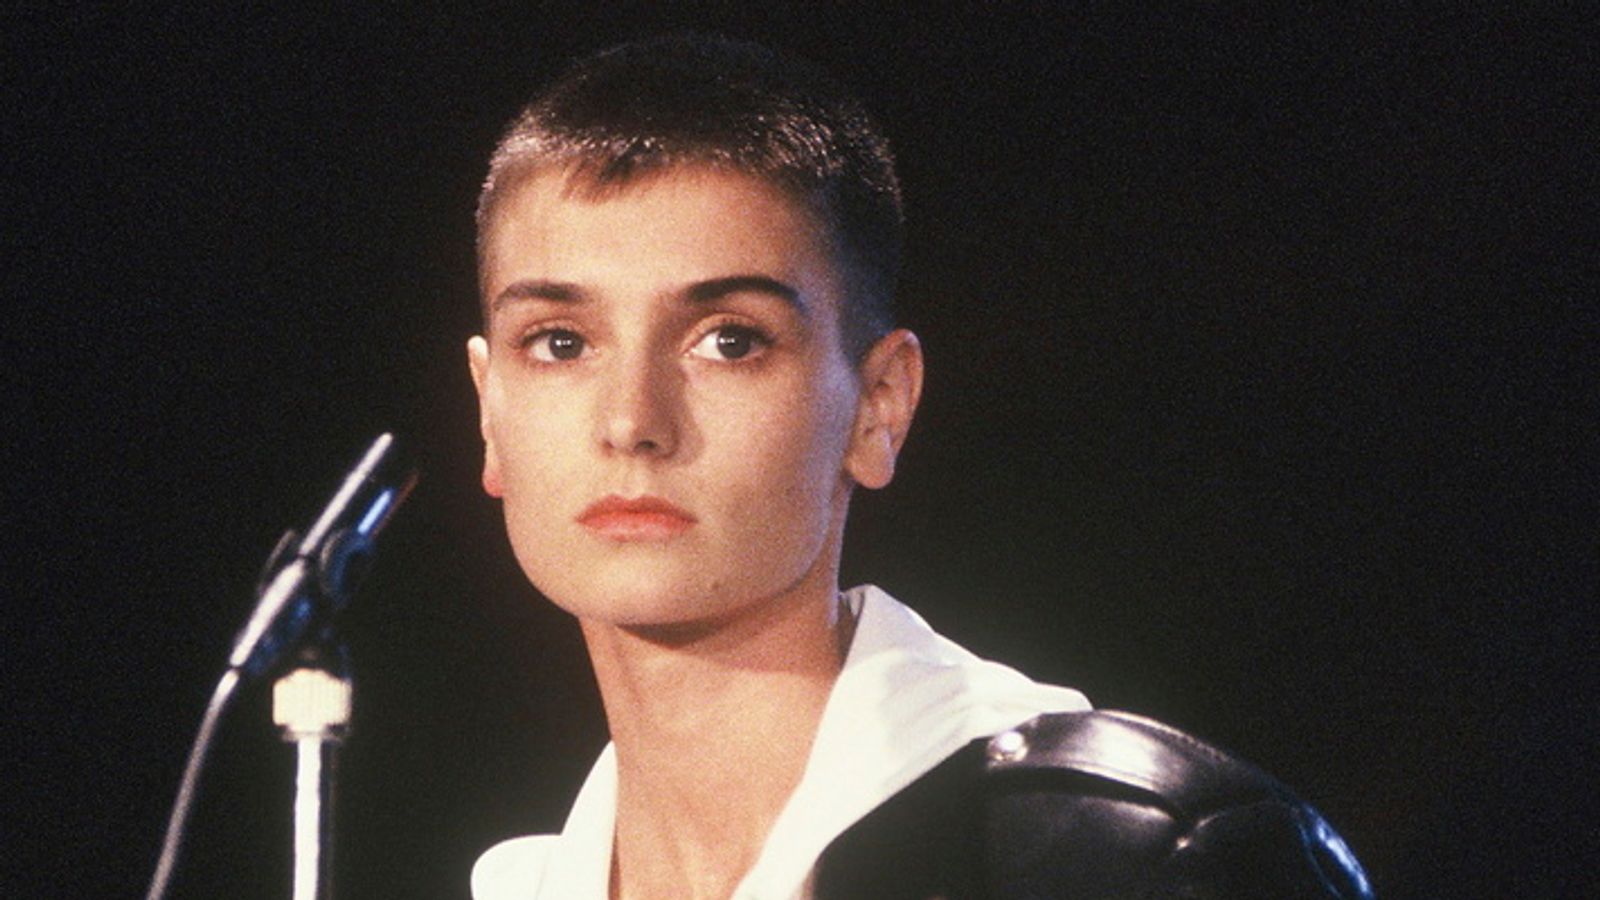 Sinead O'Connor documentary will still air despite singer's death - to 'tell her side of story'